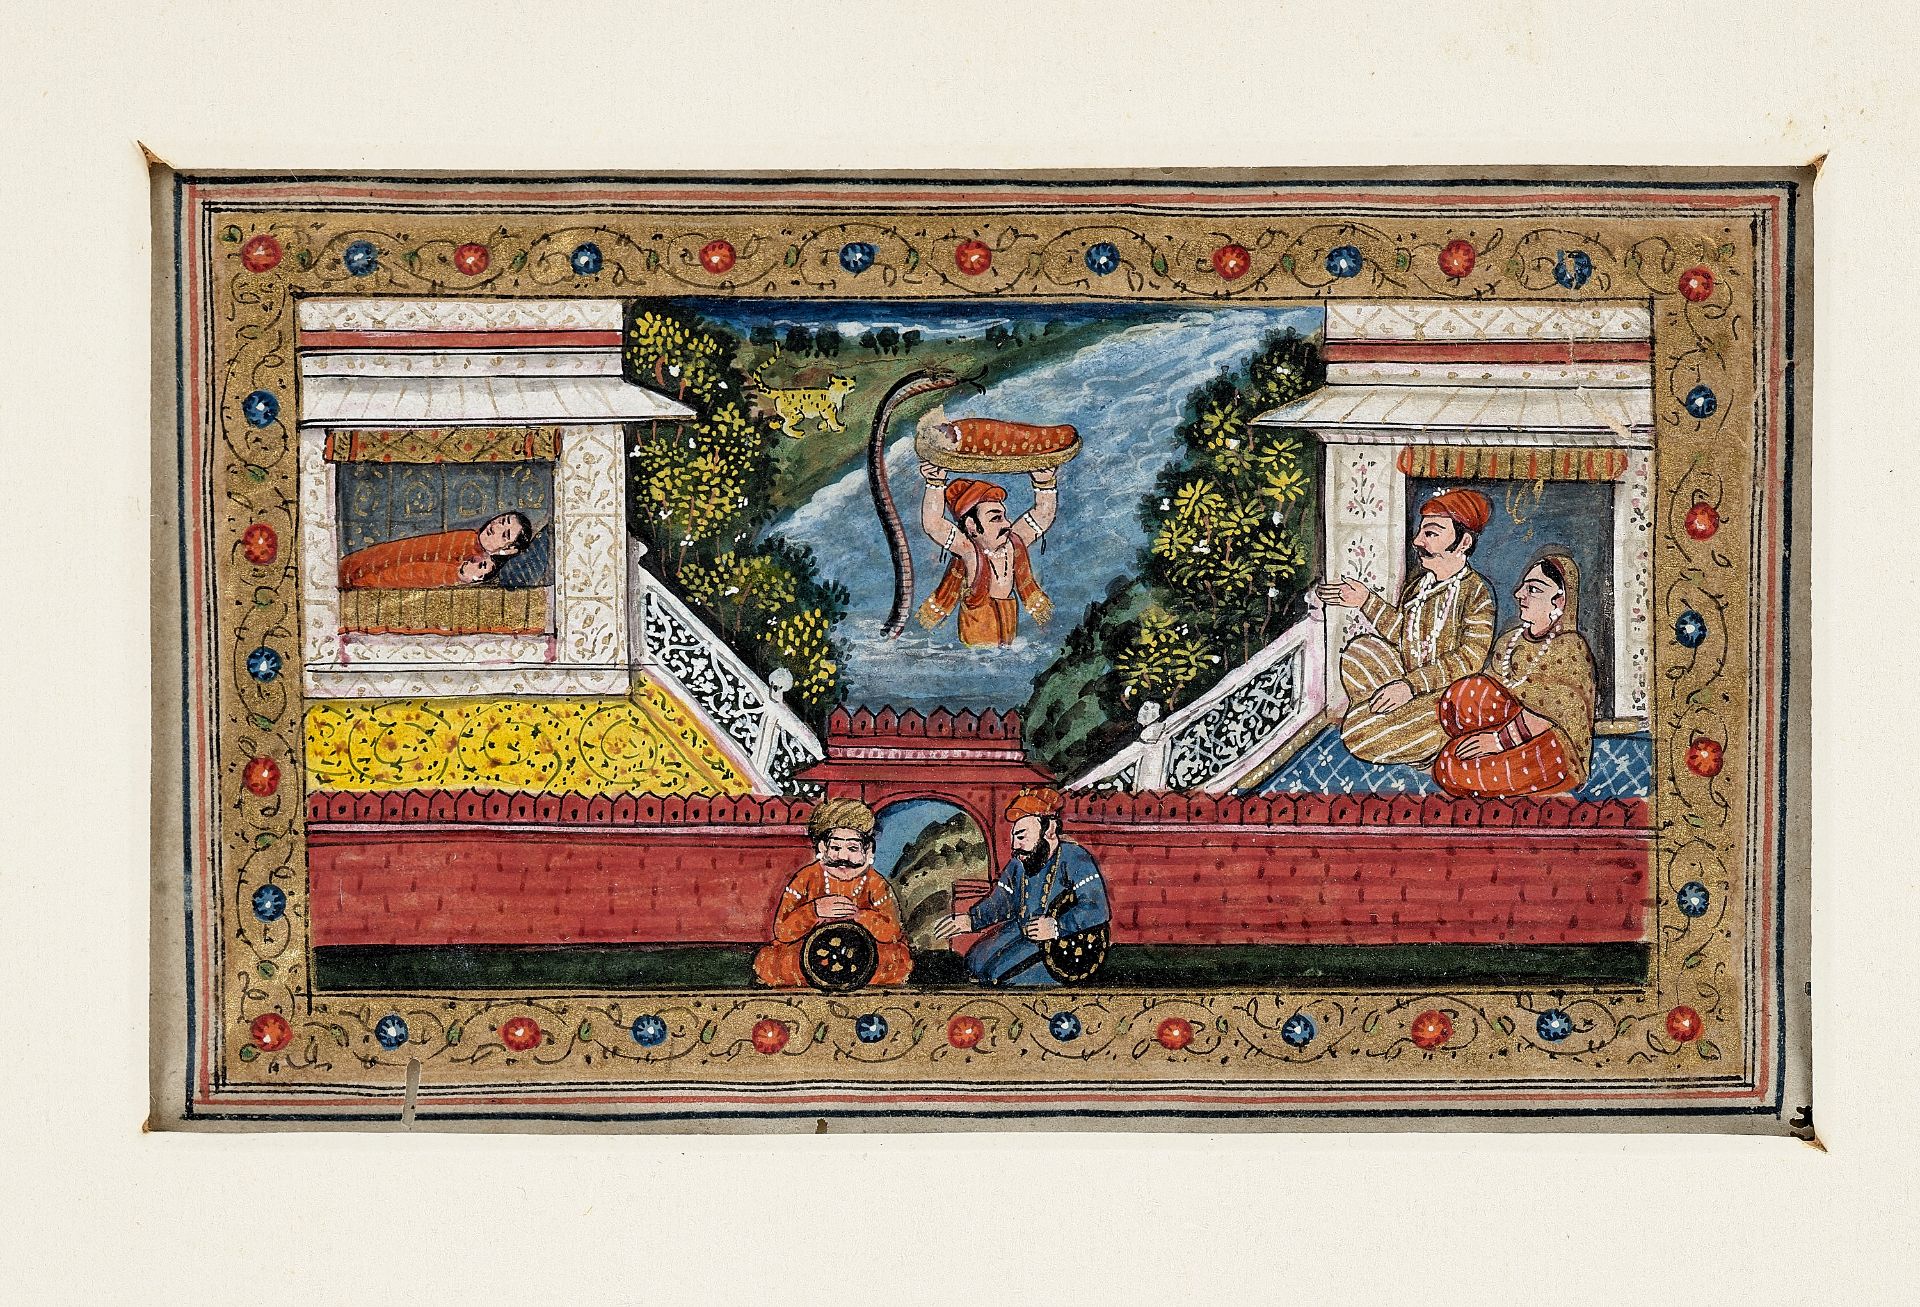 A RARE GROUP OF 27 FOLIOS FROM A MANUSCRIPT, KASHMIR 18TH CENTURY - Image 11 of 15